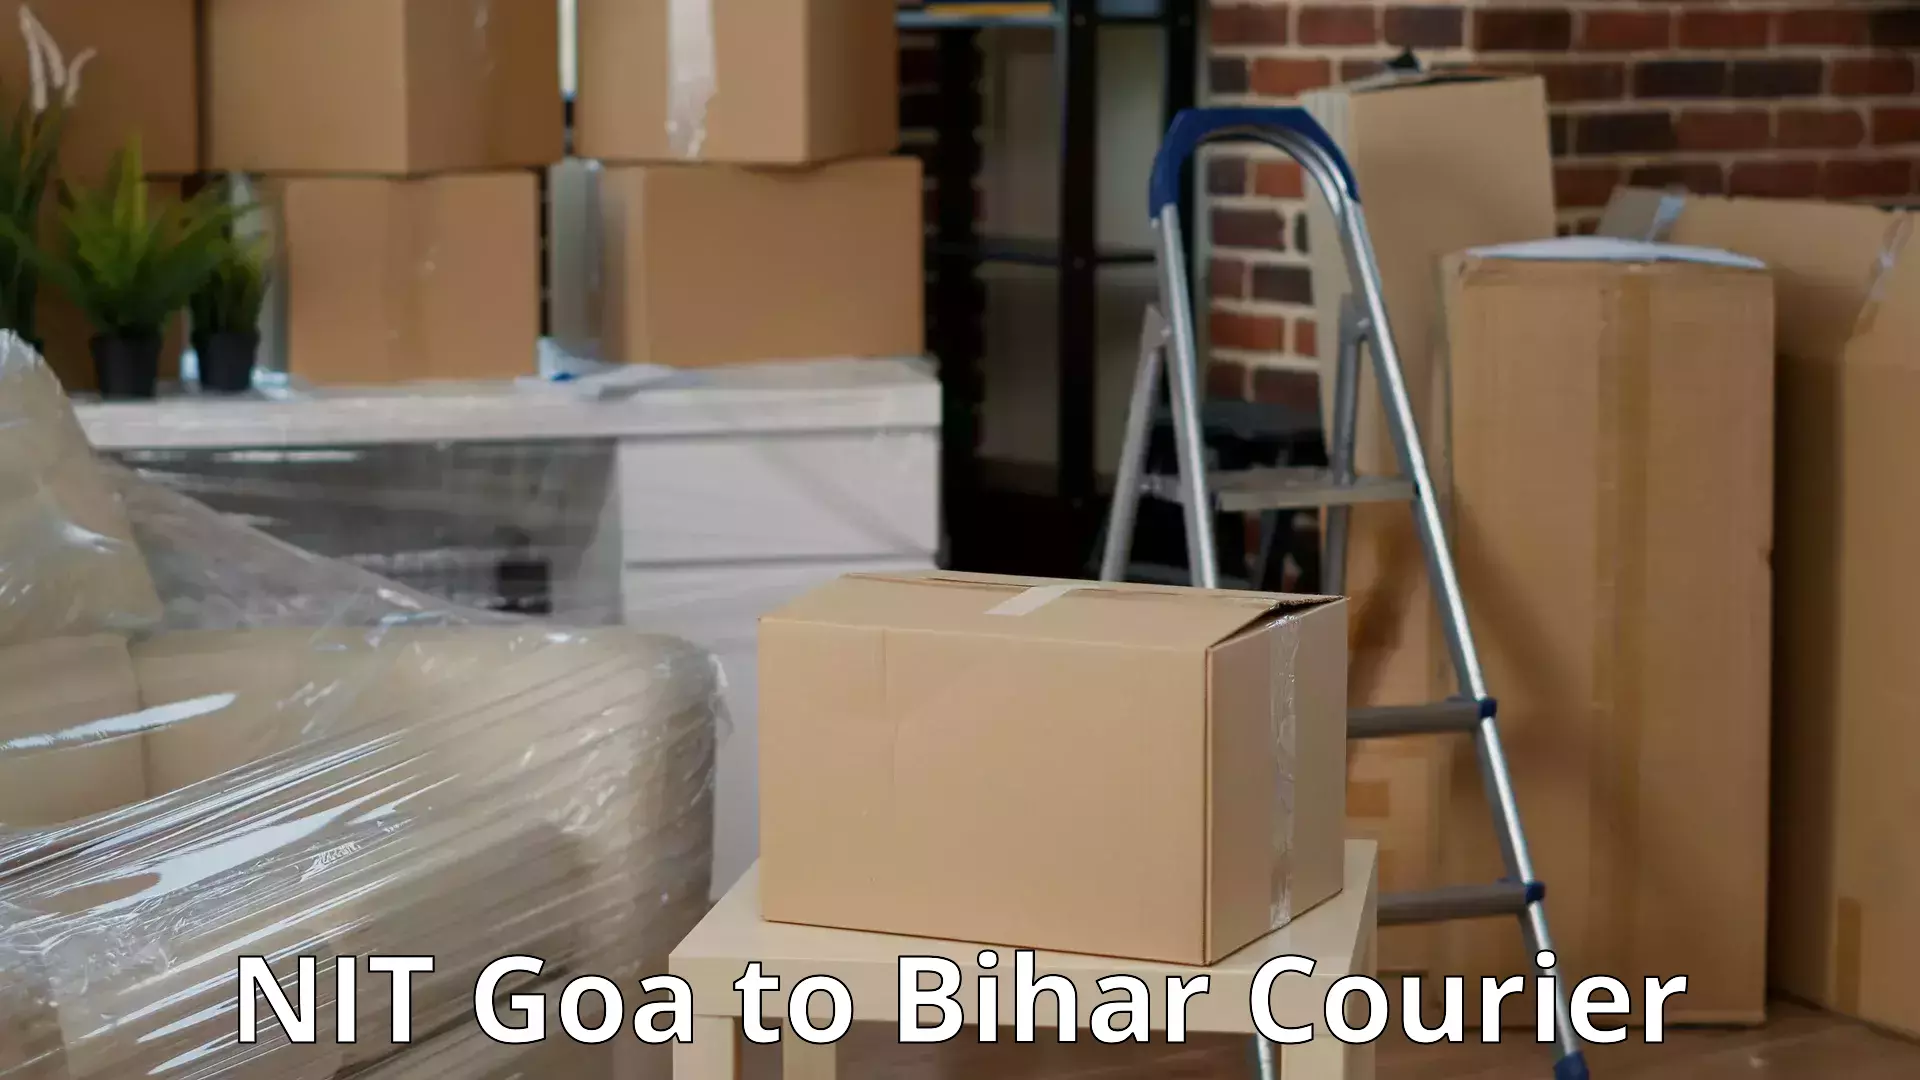 Professional relocation services NIT Goa to Bhorey